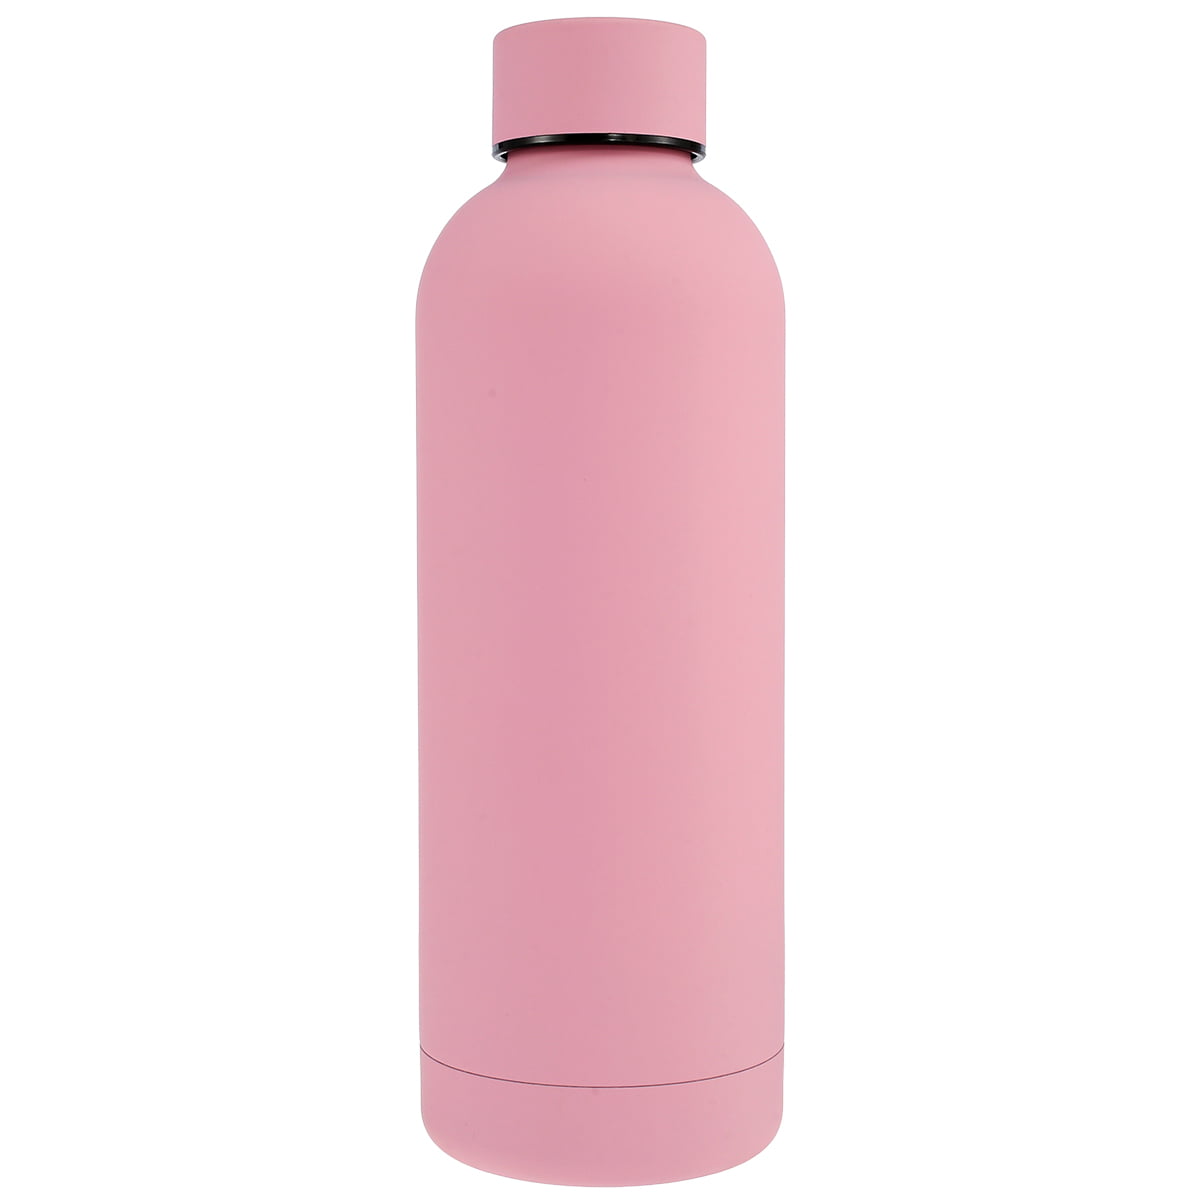 350/500/600/750ml Stainless Steel Water Bottle , Sleek Insulated Water Bottles, Keeps Hot and Cold, 100% Leakproof Lids, Sweat Proof Water Bottles